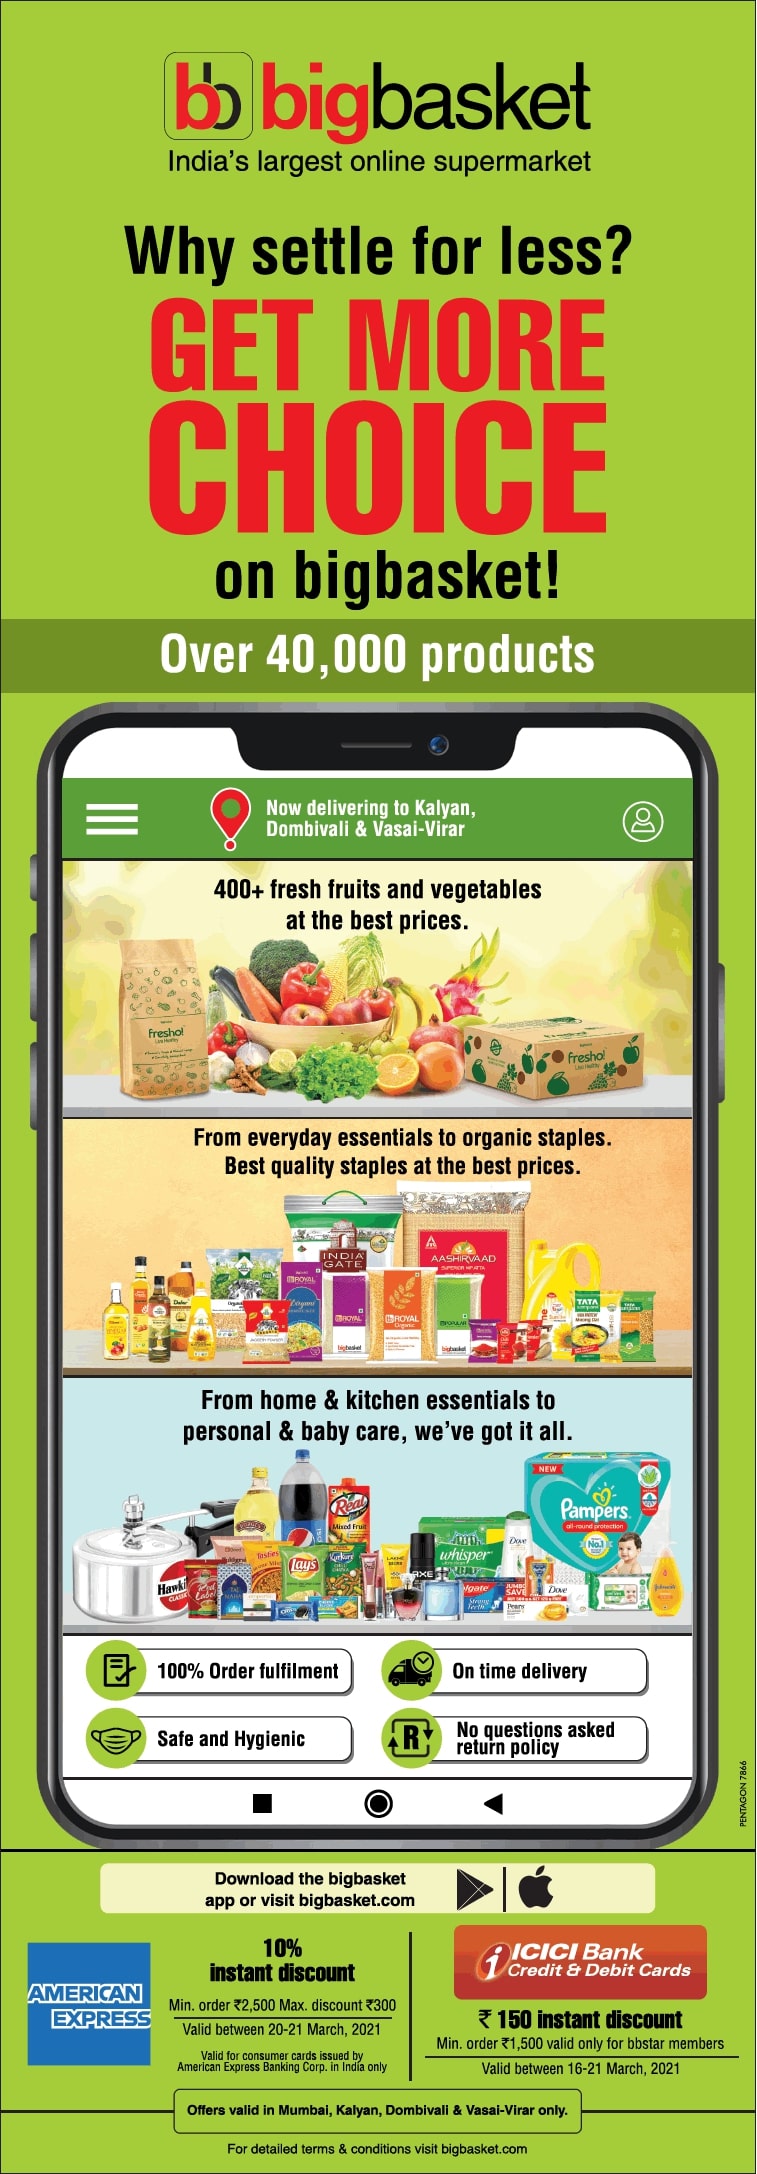 bigbasket-why-settle-for-less-get-more-choice-ad-times-of-india-mumbai-20-03-2021